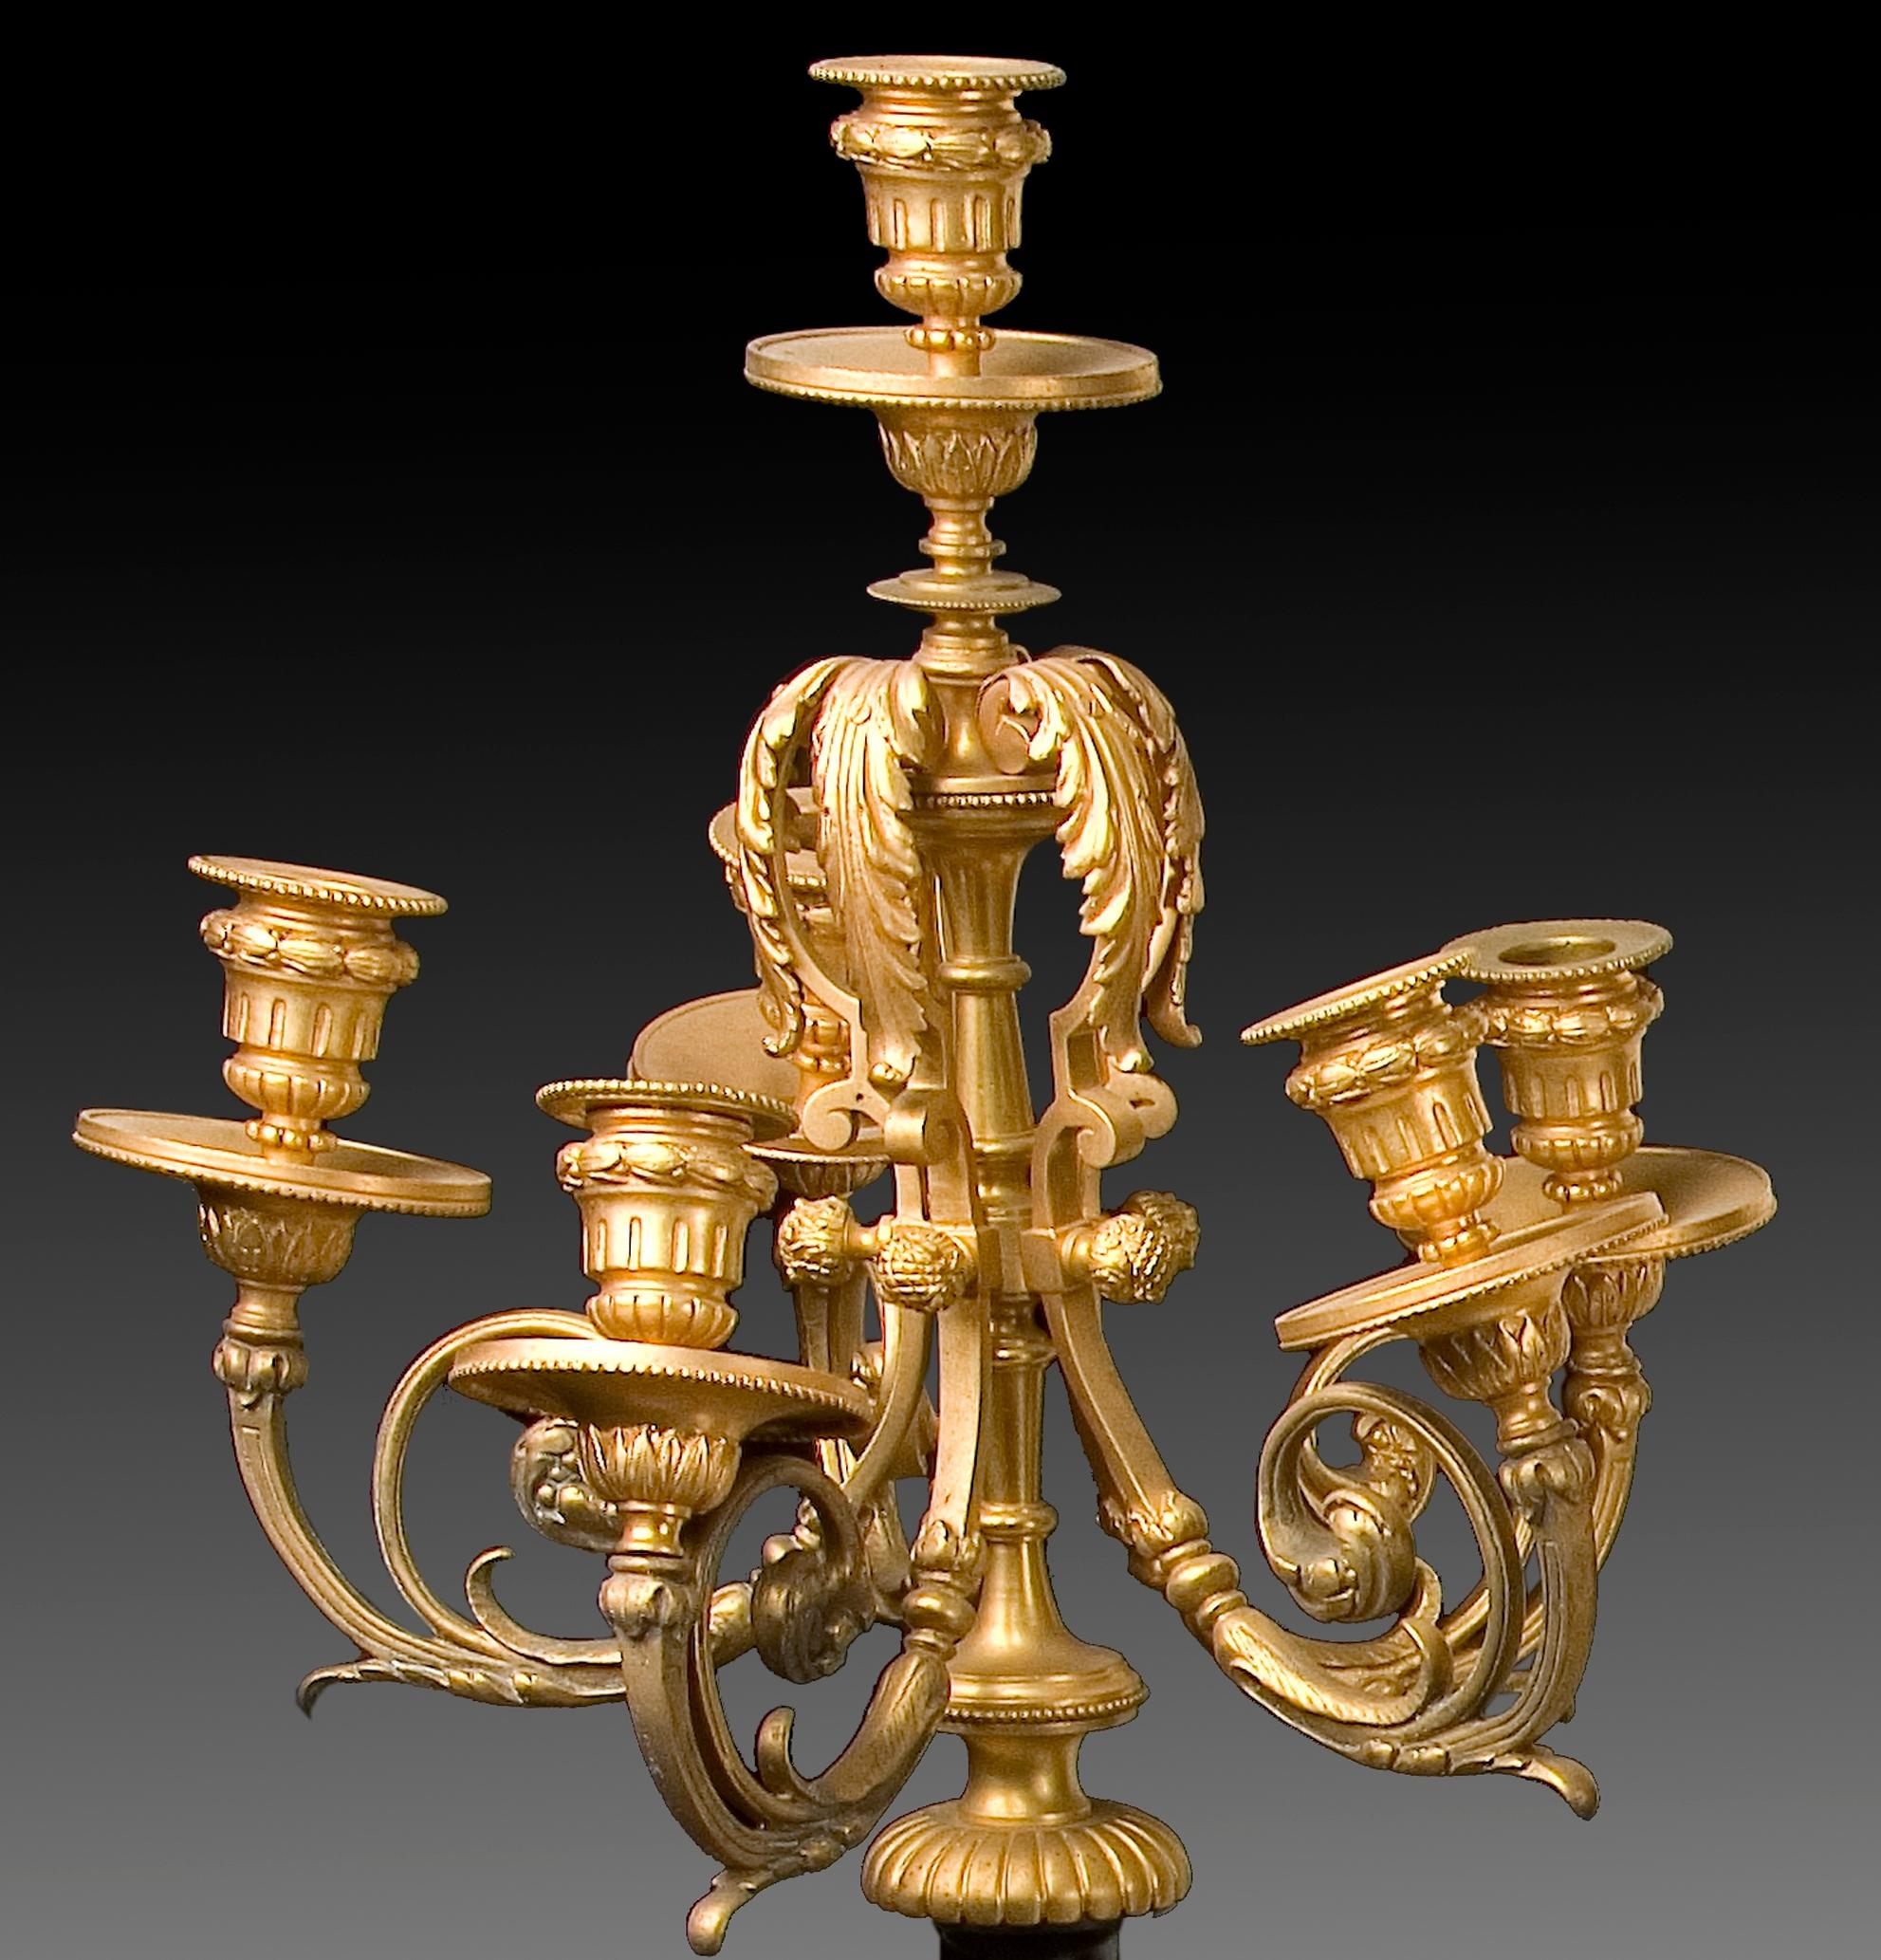 Pair of candleholders. Belgian bronze and marble, 19th century.
Pair of chandeliers with six lights each made in gilt bronze and Belgian marble with a clear classicist inspiration. Both the square stepped pedestal decorated with plant elements and